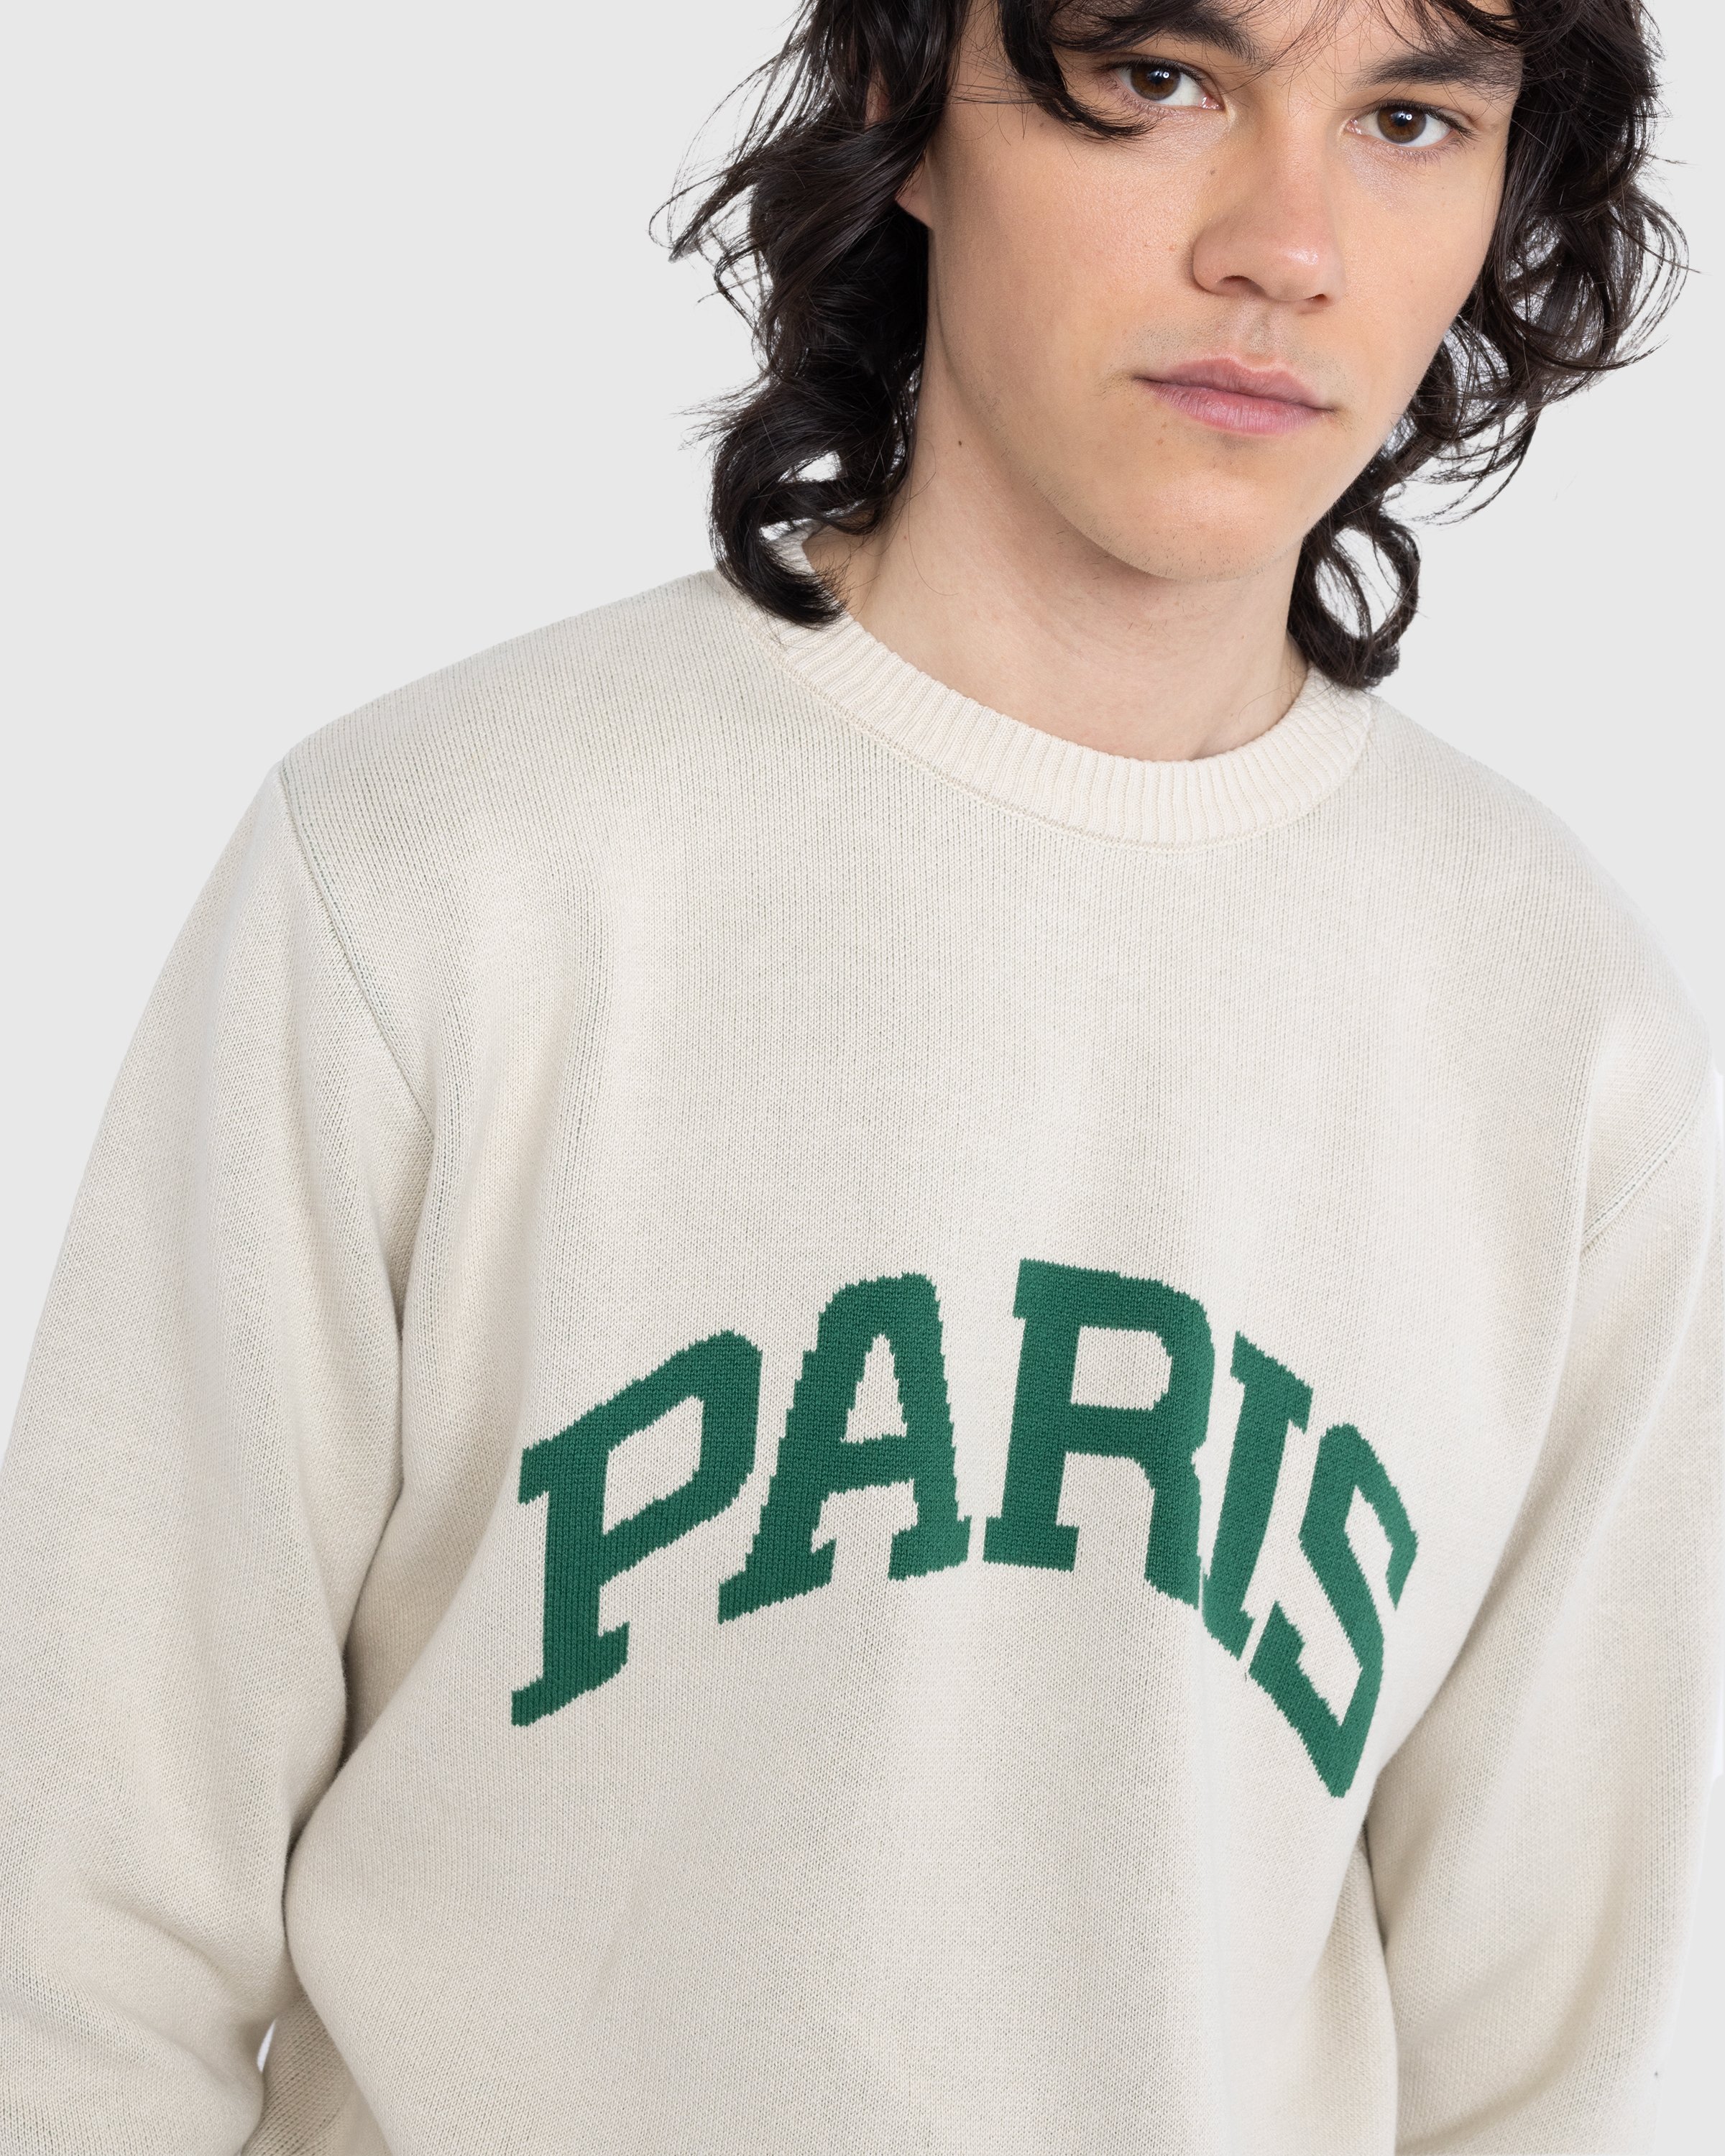 Highsnobiety - Not in Paris 5 Knitted Sweater - Clothing - Beige - Image 4